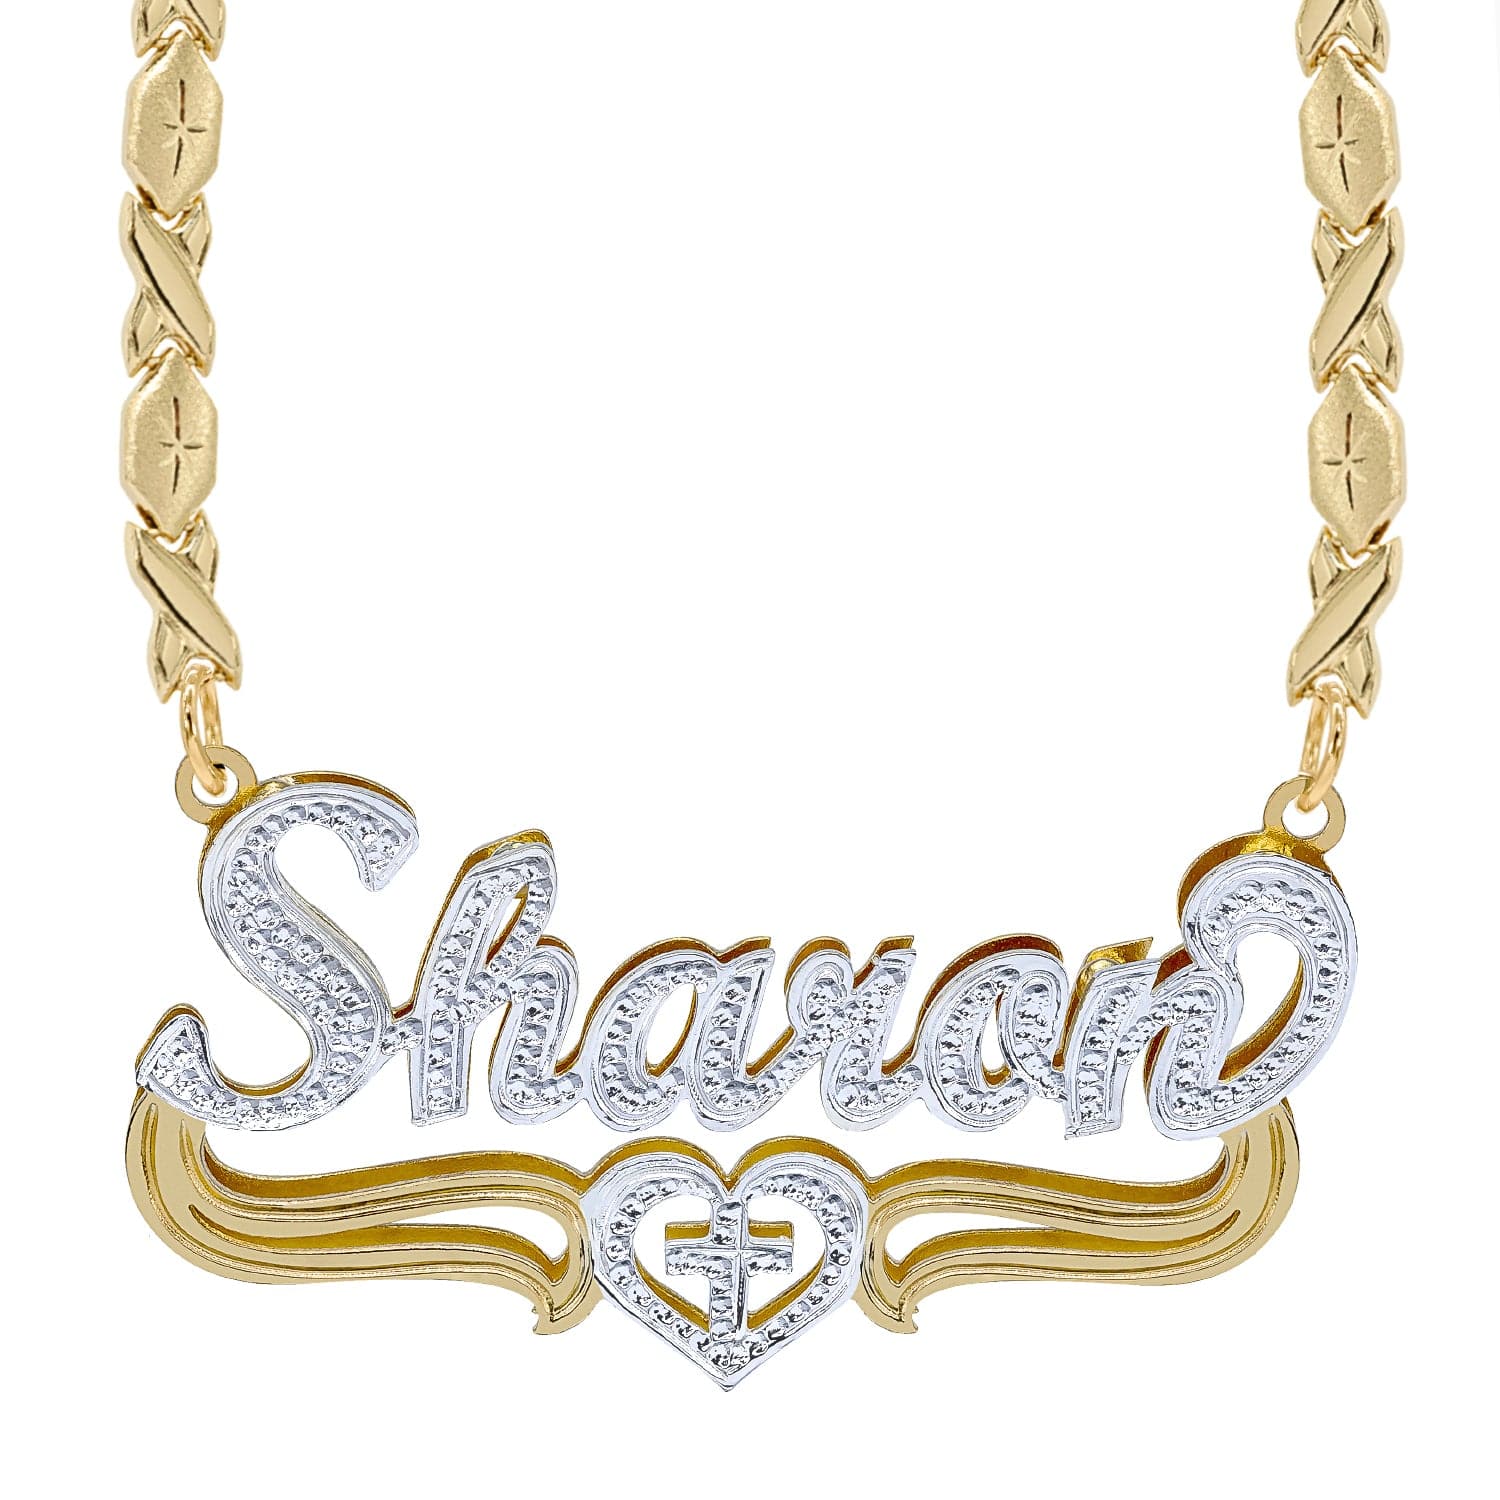 14k Gold over Sterling Silver / Xoxo Chain Double Plated Nameplate Necklace "Sharon" with Xoxo chain